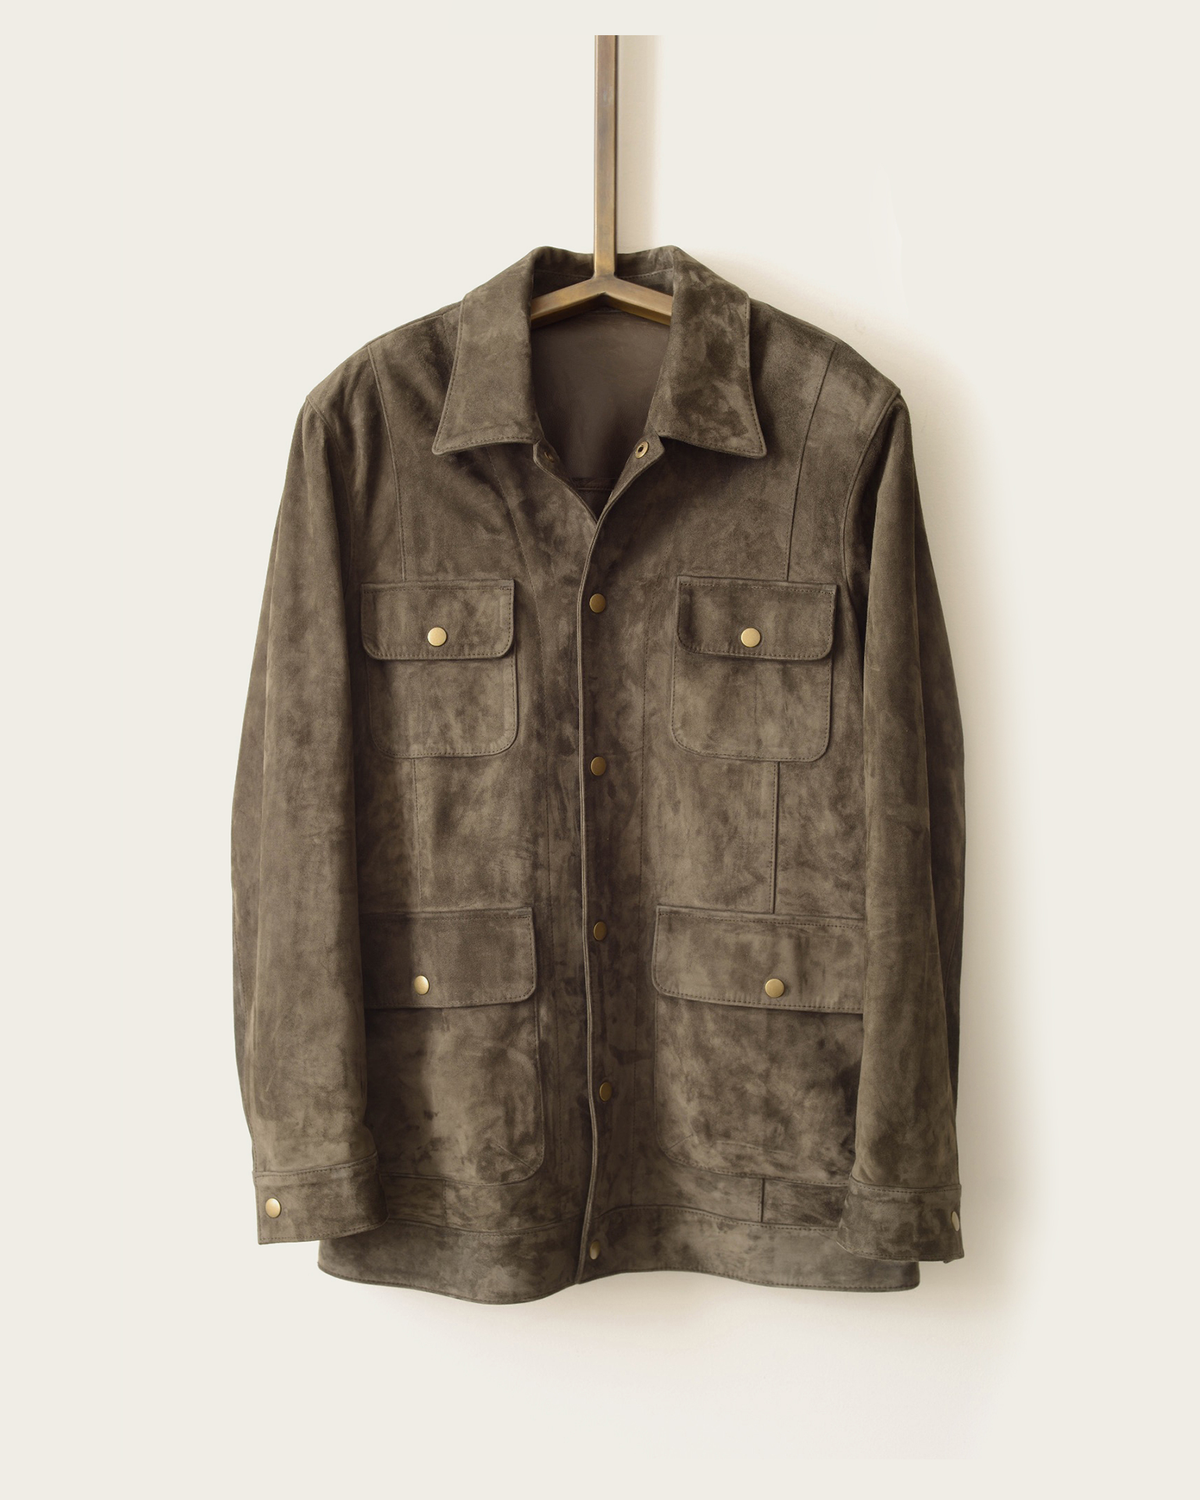 Image of the Irving Utility Jacket from Savas